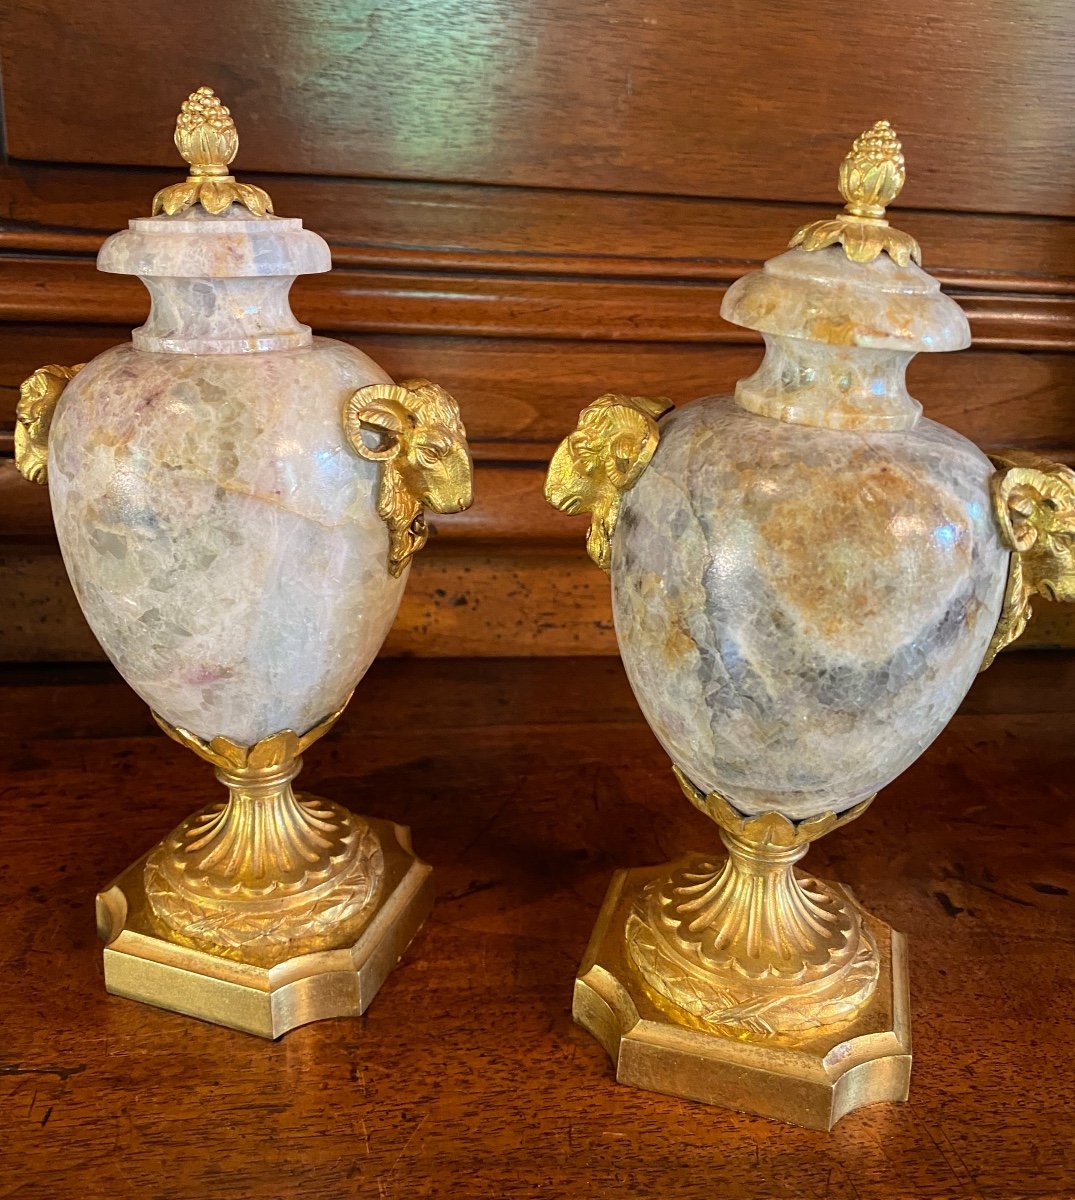 Pair Of Blue John Covered Vases Circa 1780 Attributed To Matthew Boulton -